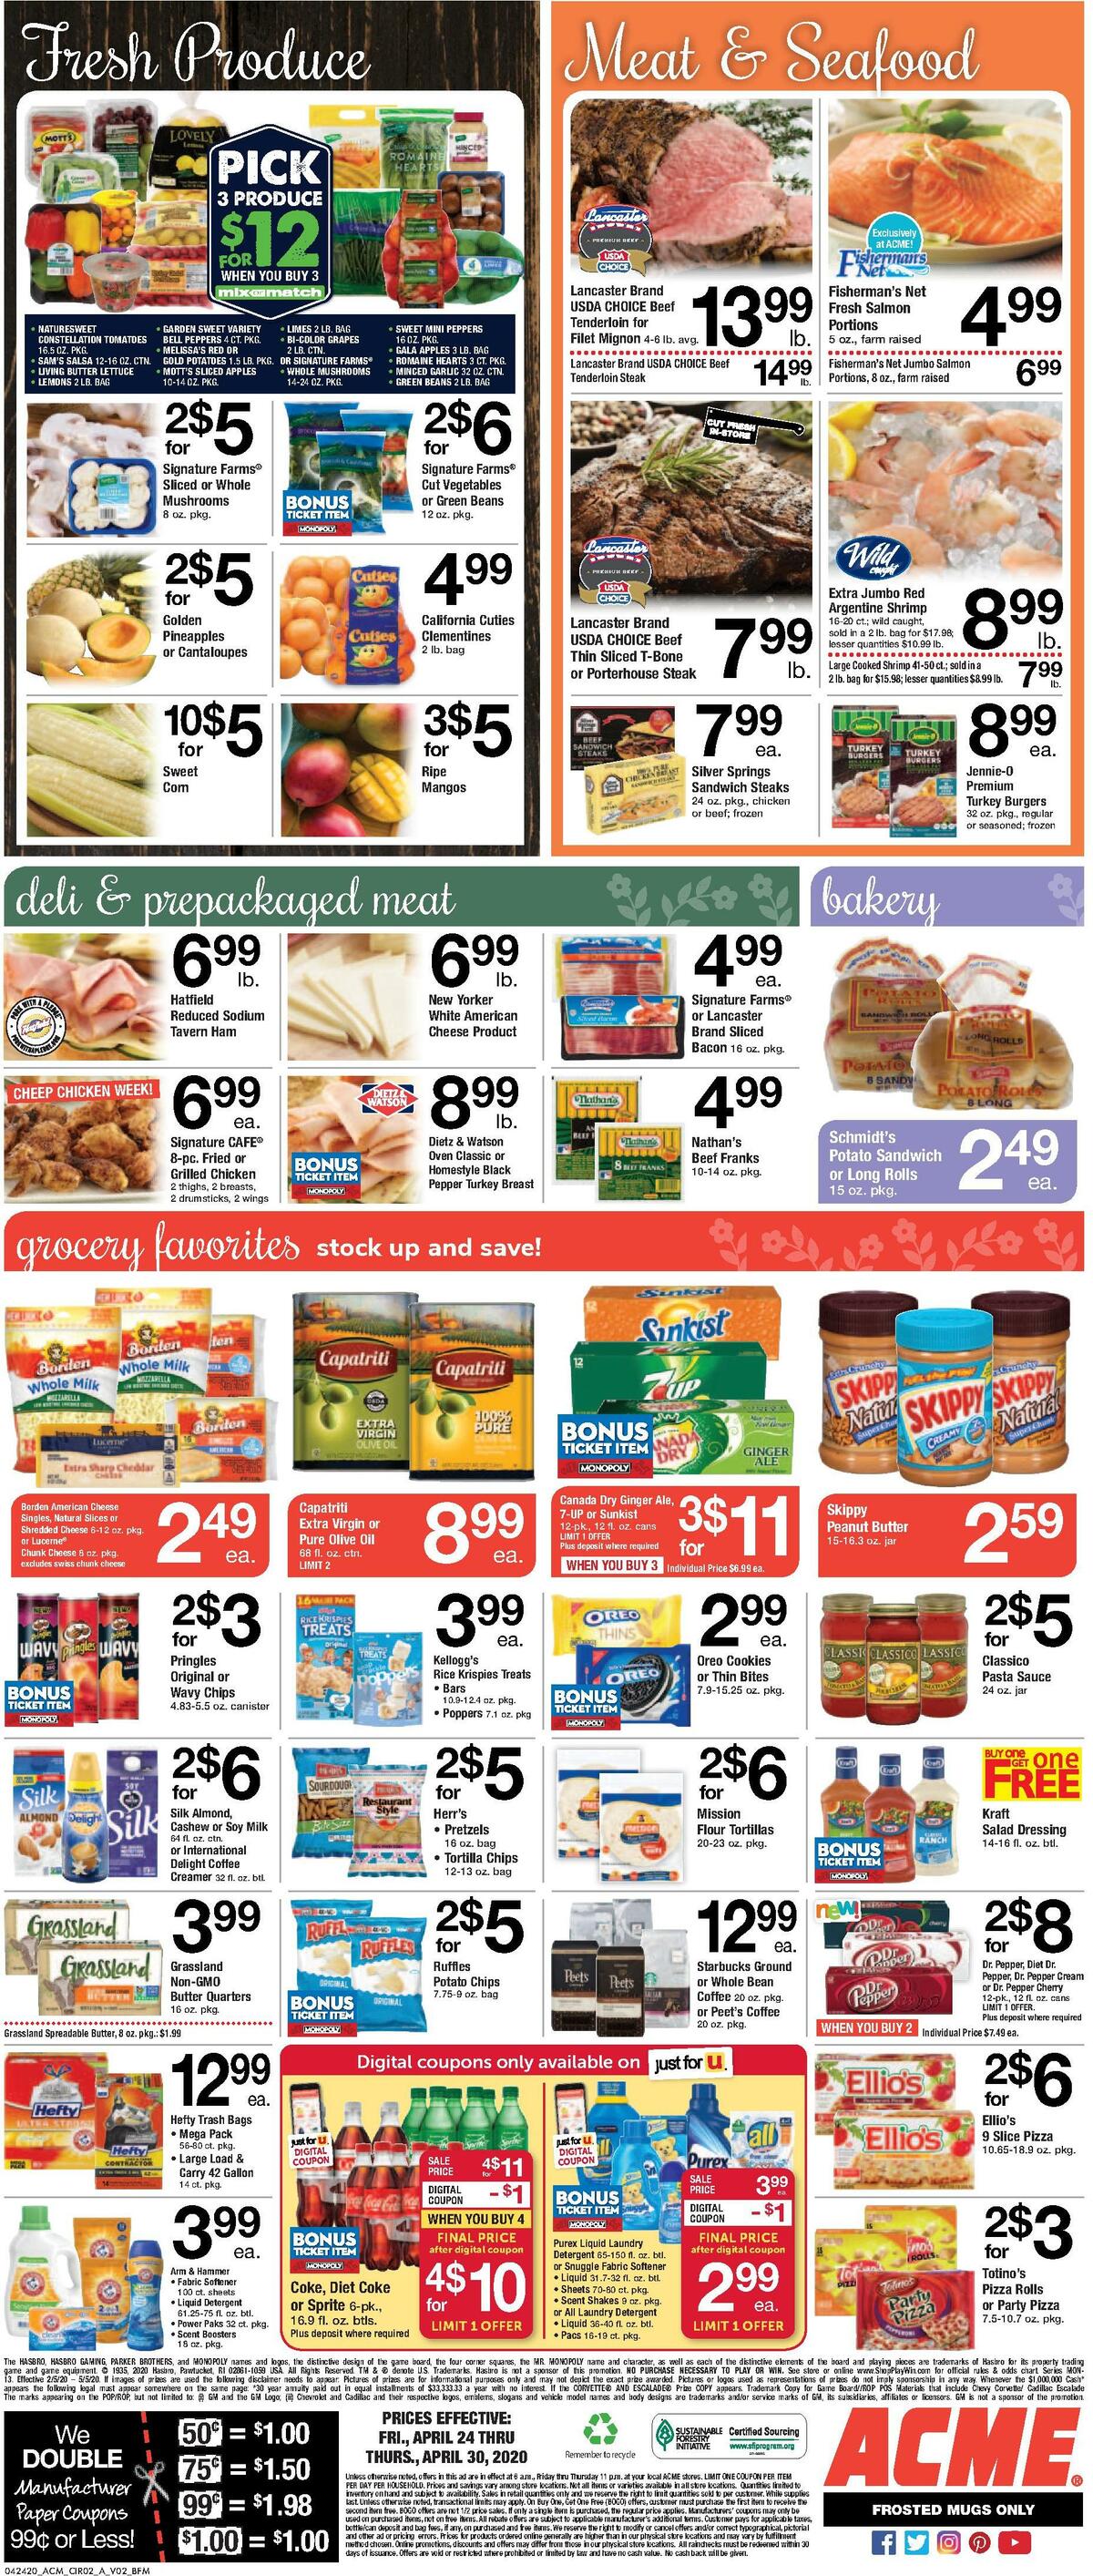 ACME Markets Weekly Ad from April 24